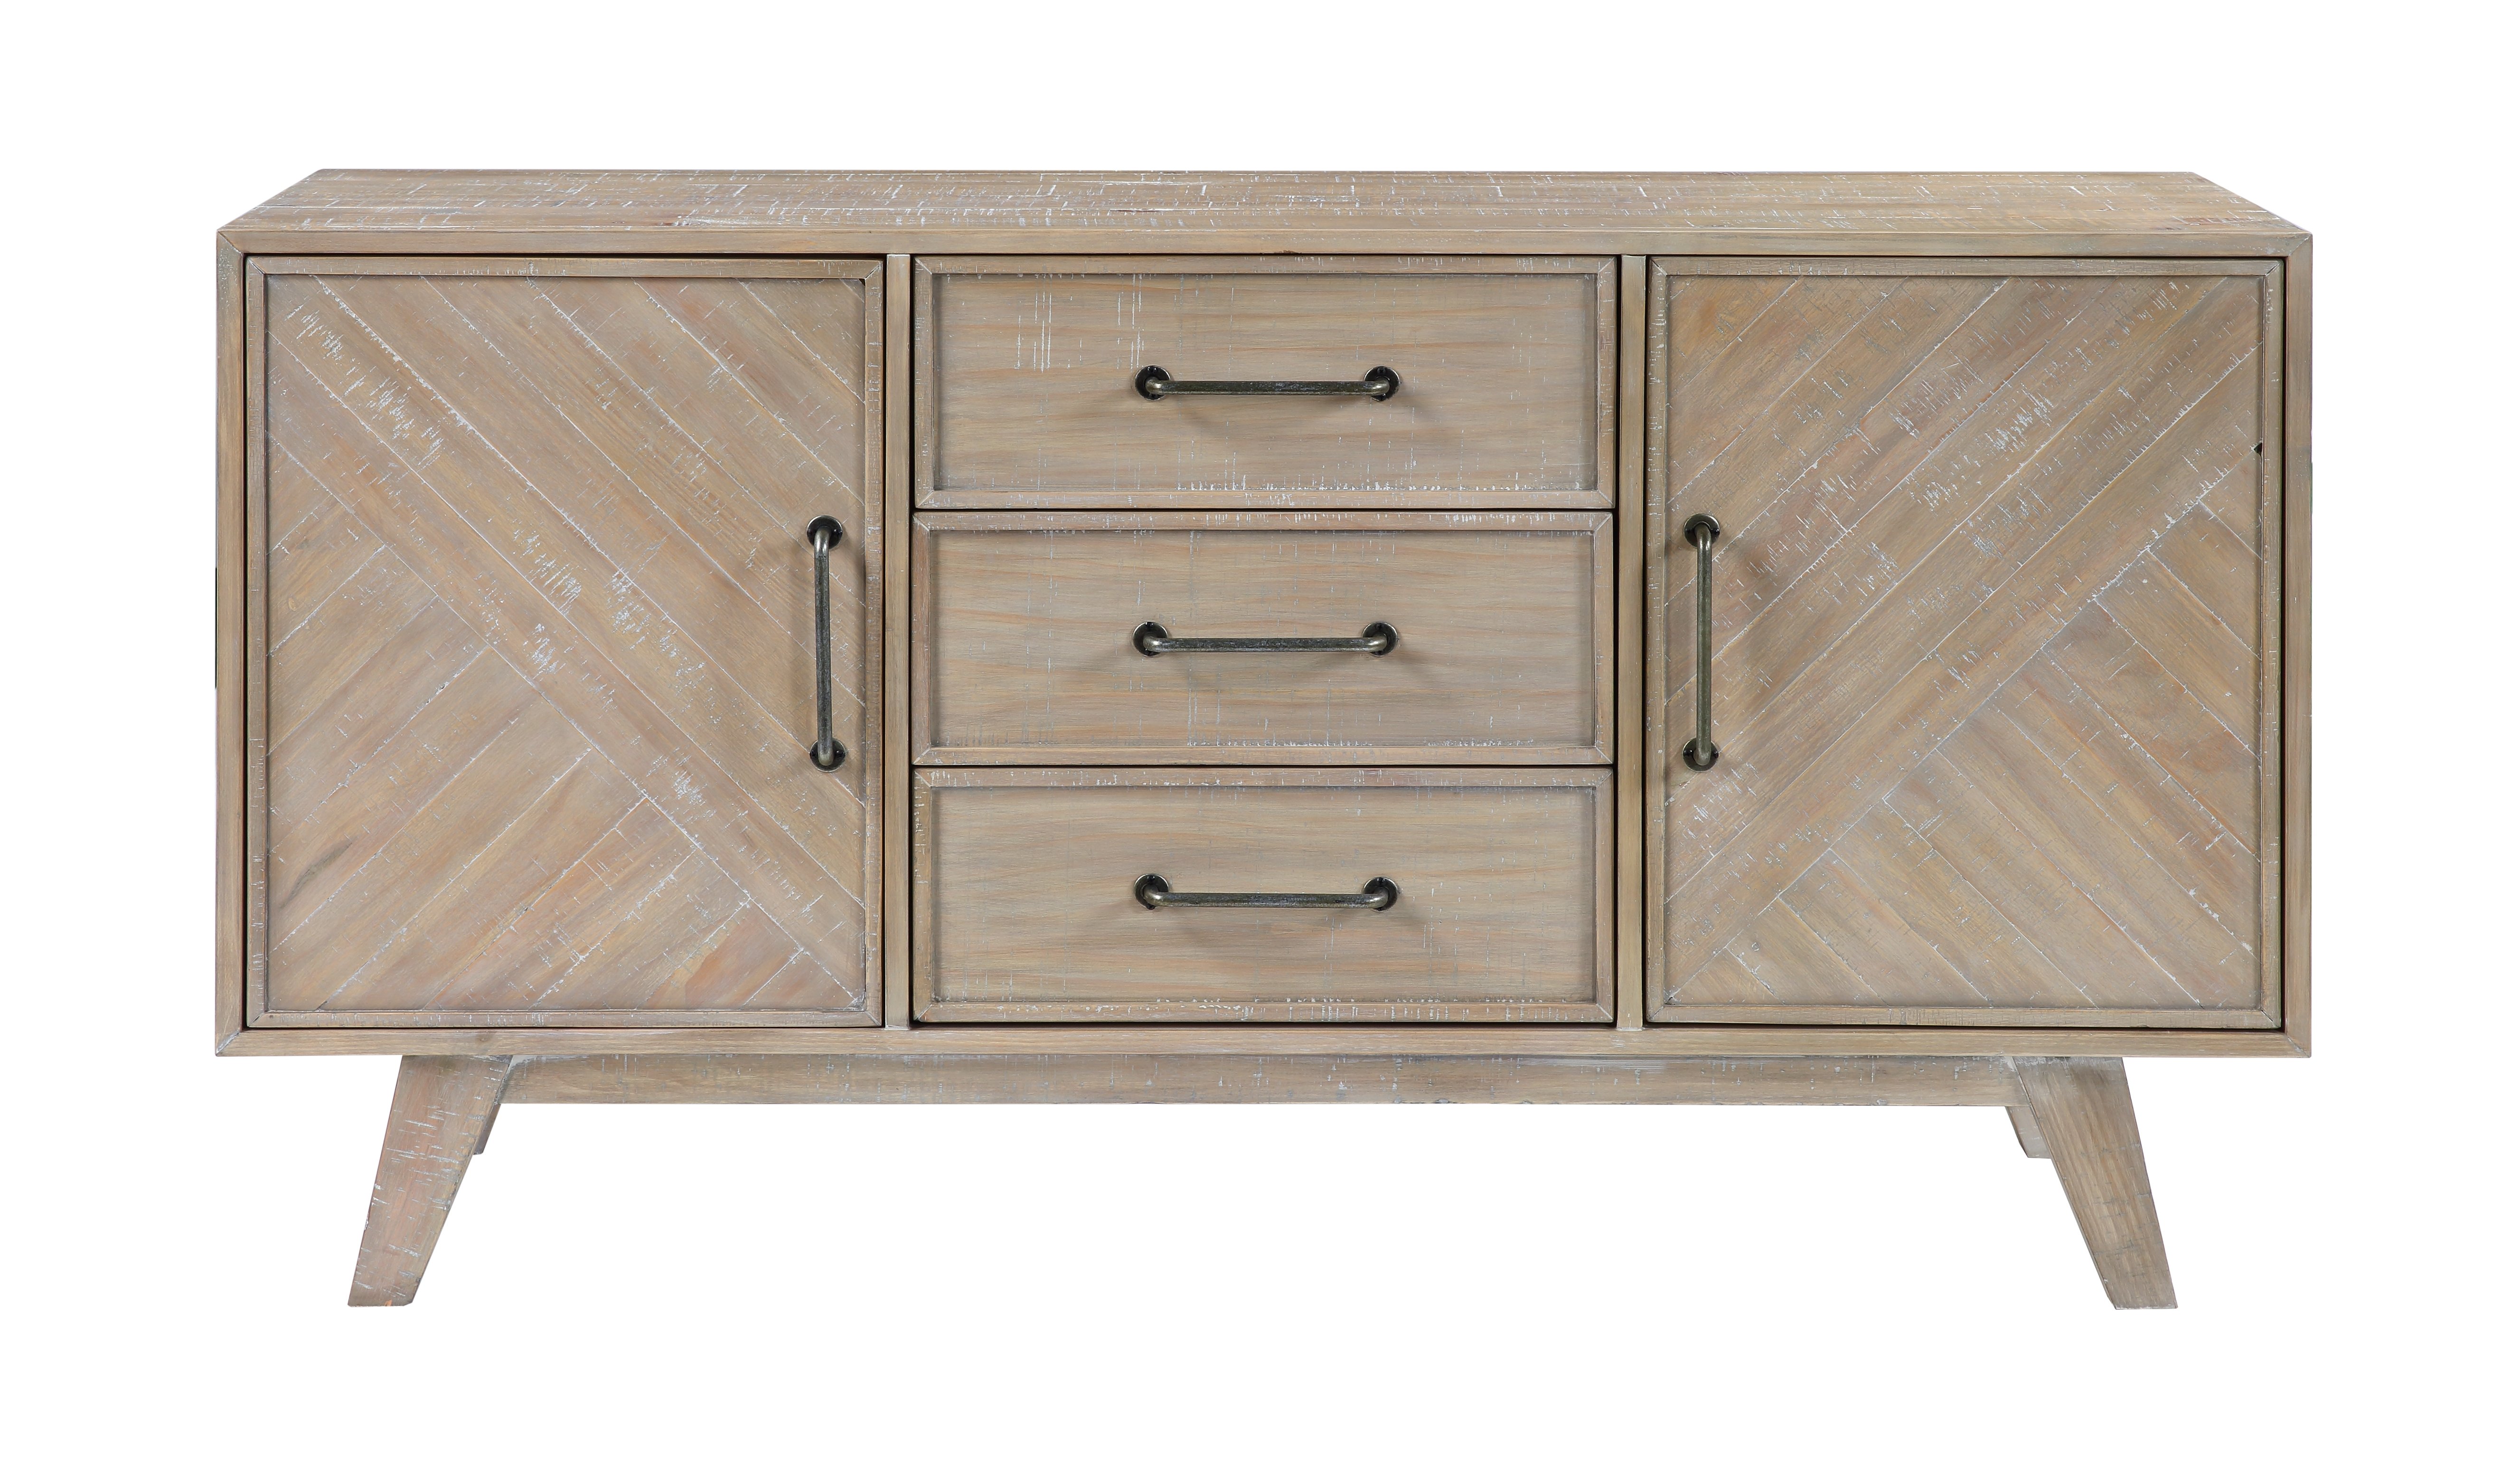 Barrister Three Drawer Two Door Credenza - Barrister Distressed - Image 1